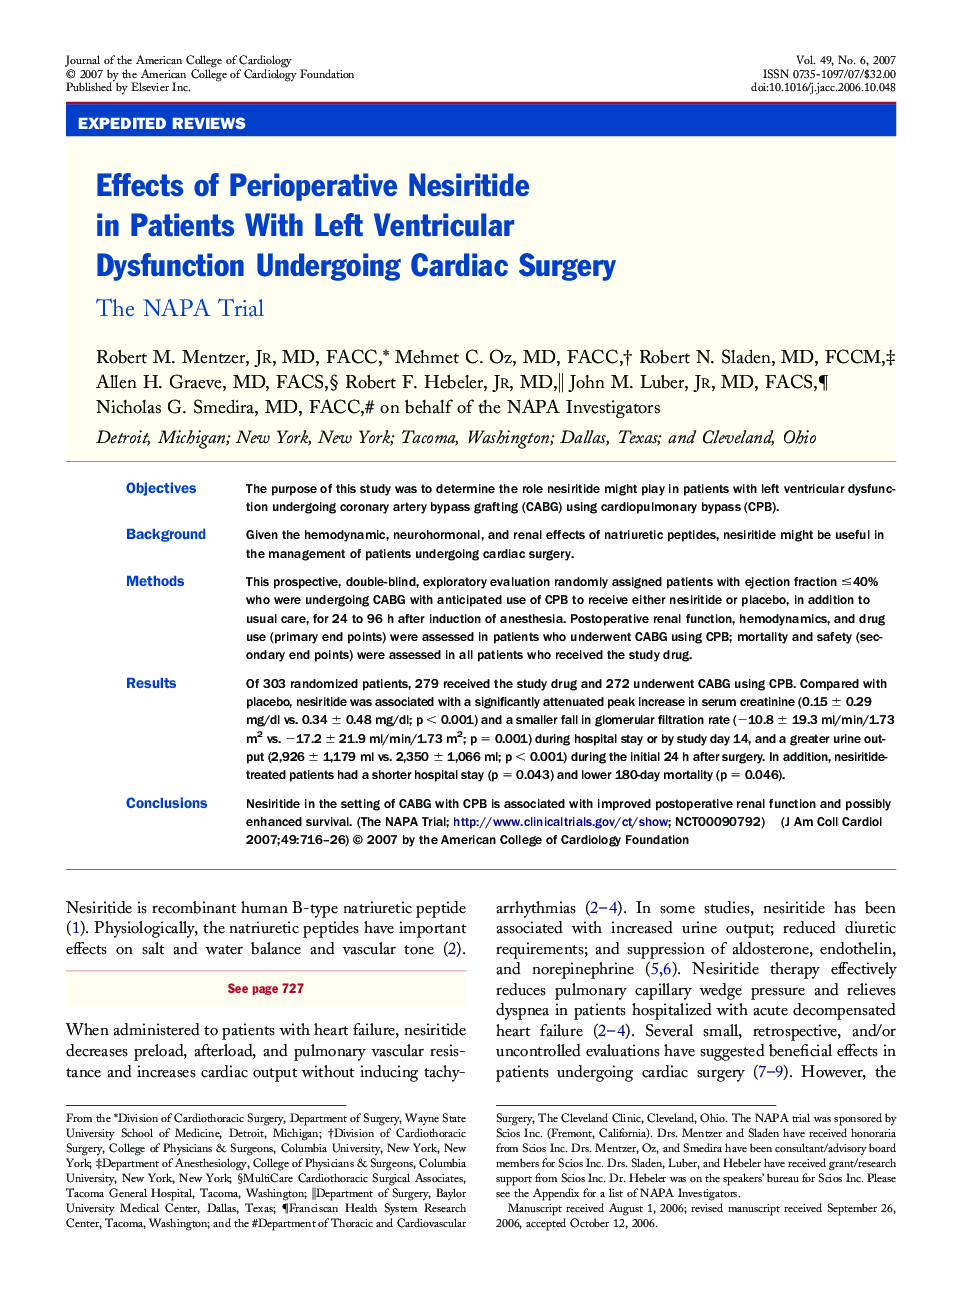 Effects of Perioperative Nesiritide in Patients With Left Ventricular Dysfunction Undergoing Cardiac Surgery : The NAPA Trial